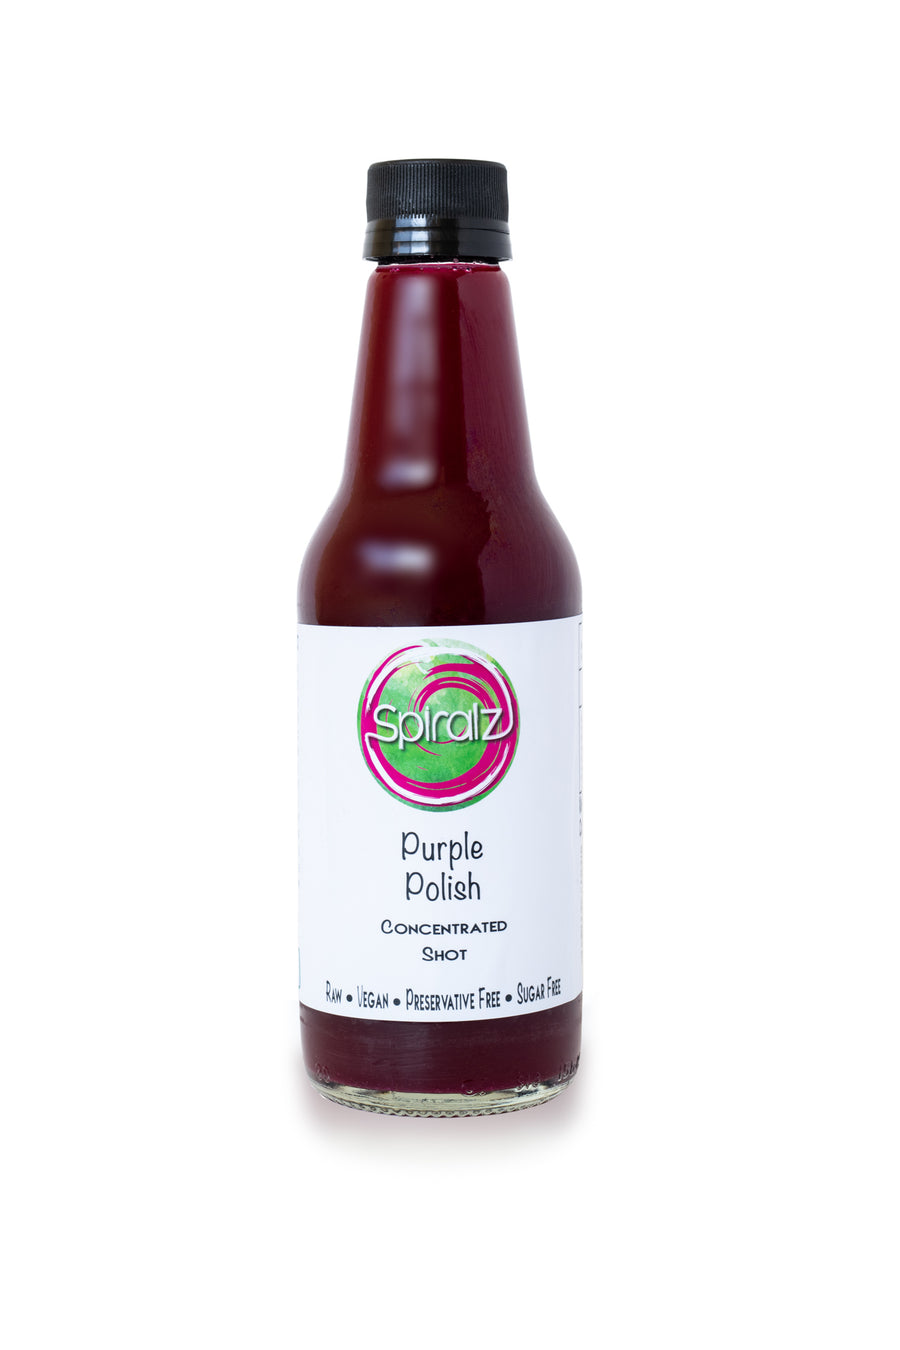 Spiralz Organic Traditional Polish Concentrated Shots